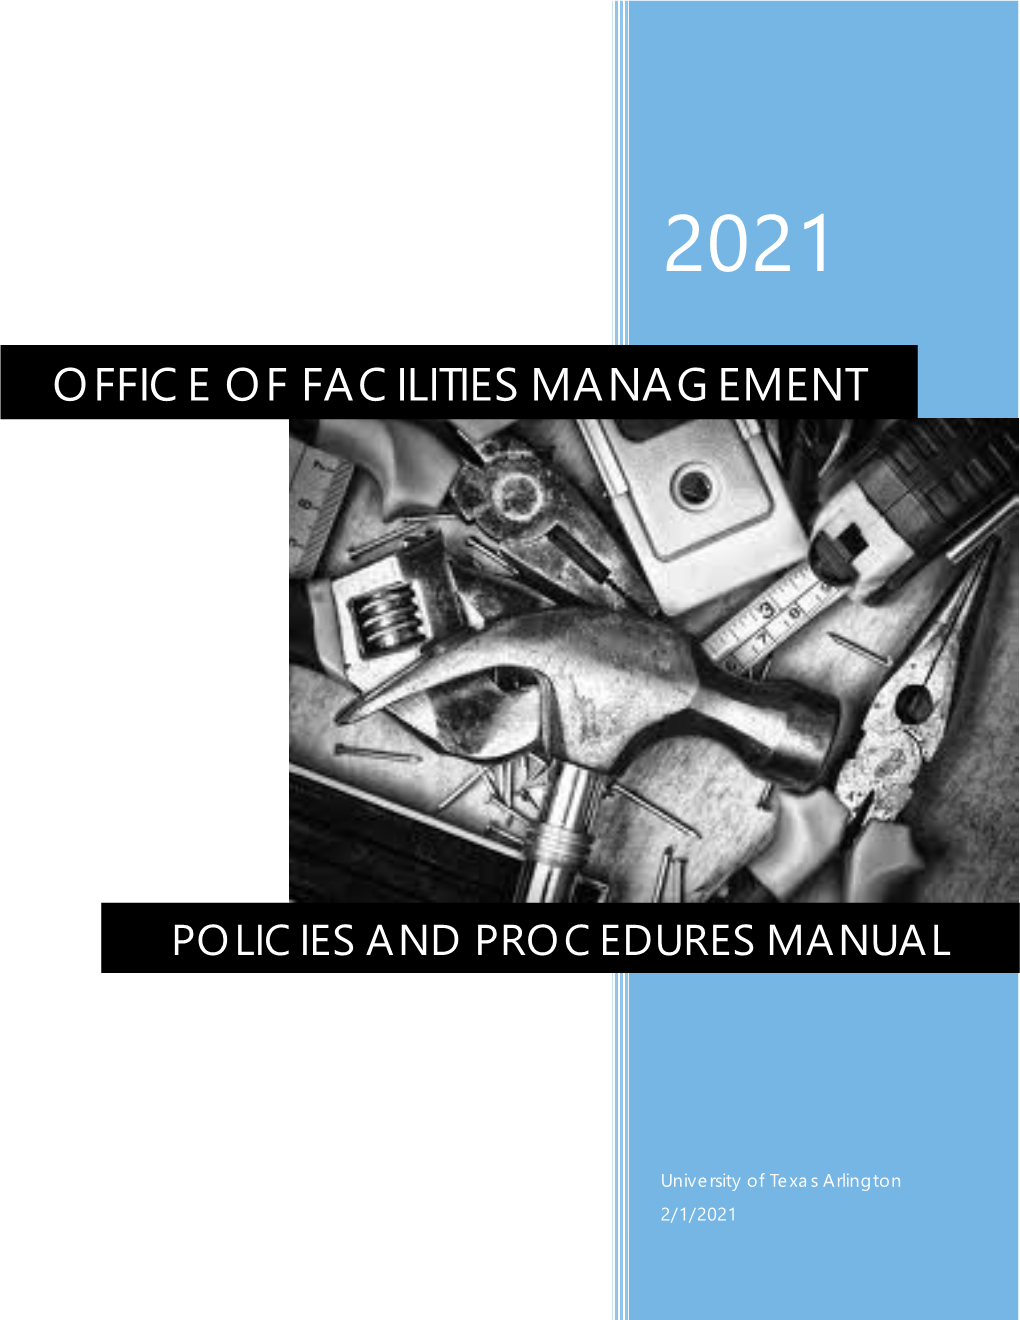 Office of Facilities Management